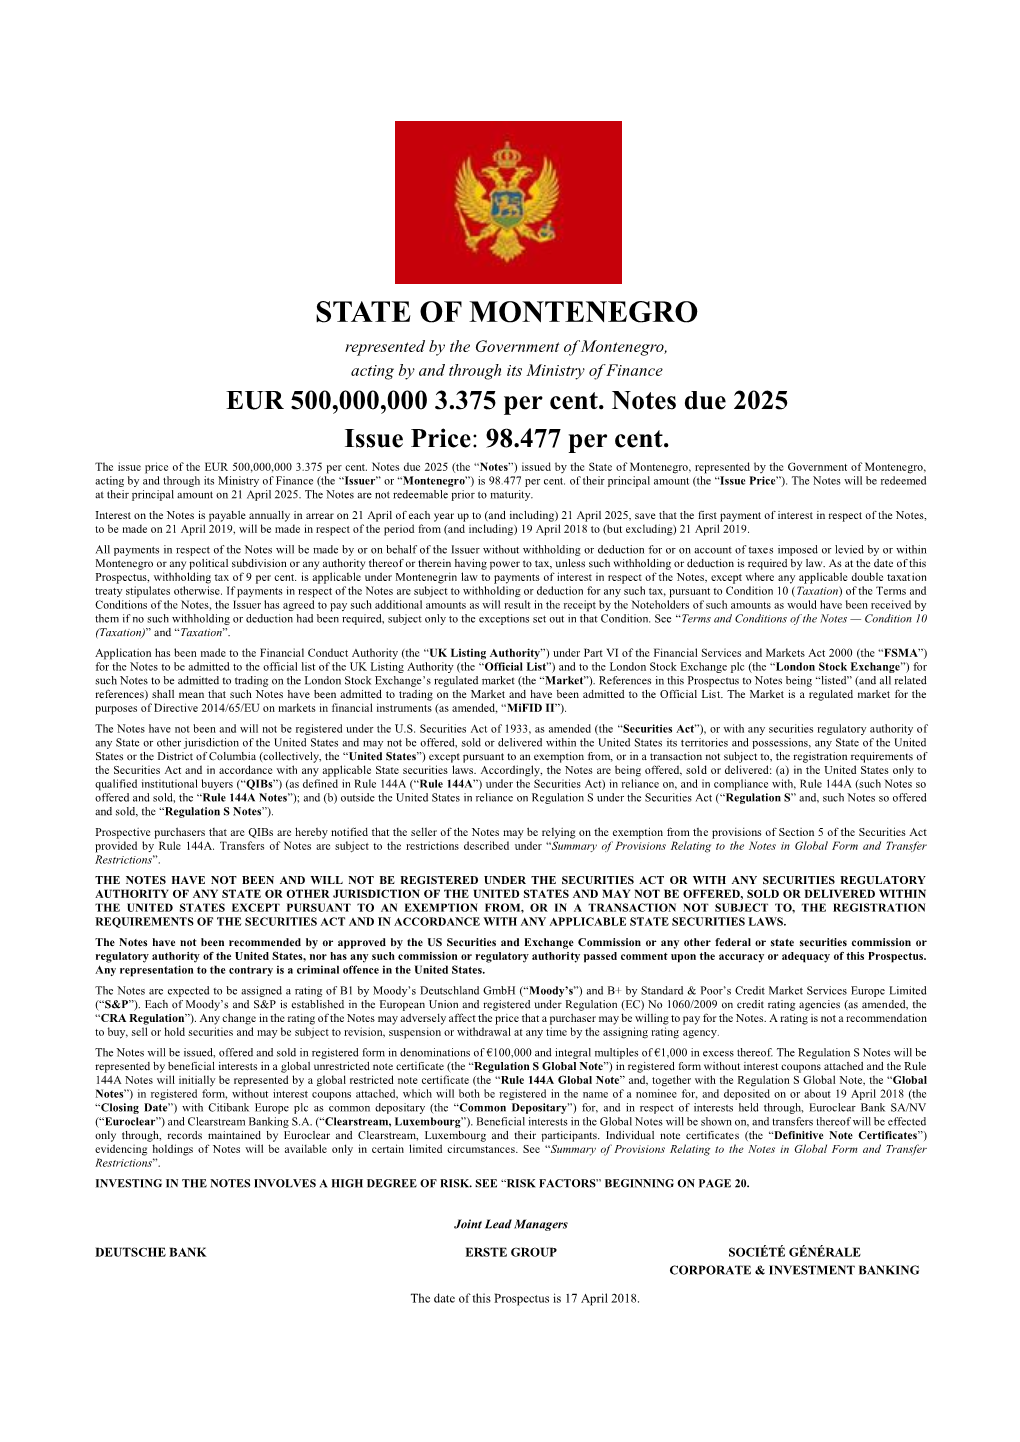 STATE of MONTENEGRO Represented by the Government of Montenegro, Acting by and Through Its Ministry of Finance EUR 500,000,000 3.375 Per Cent